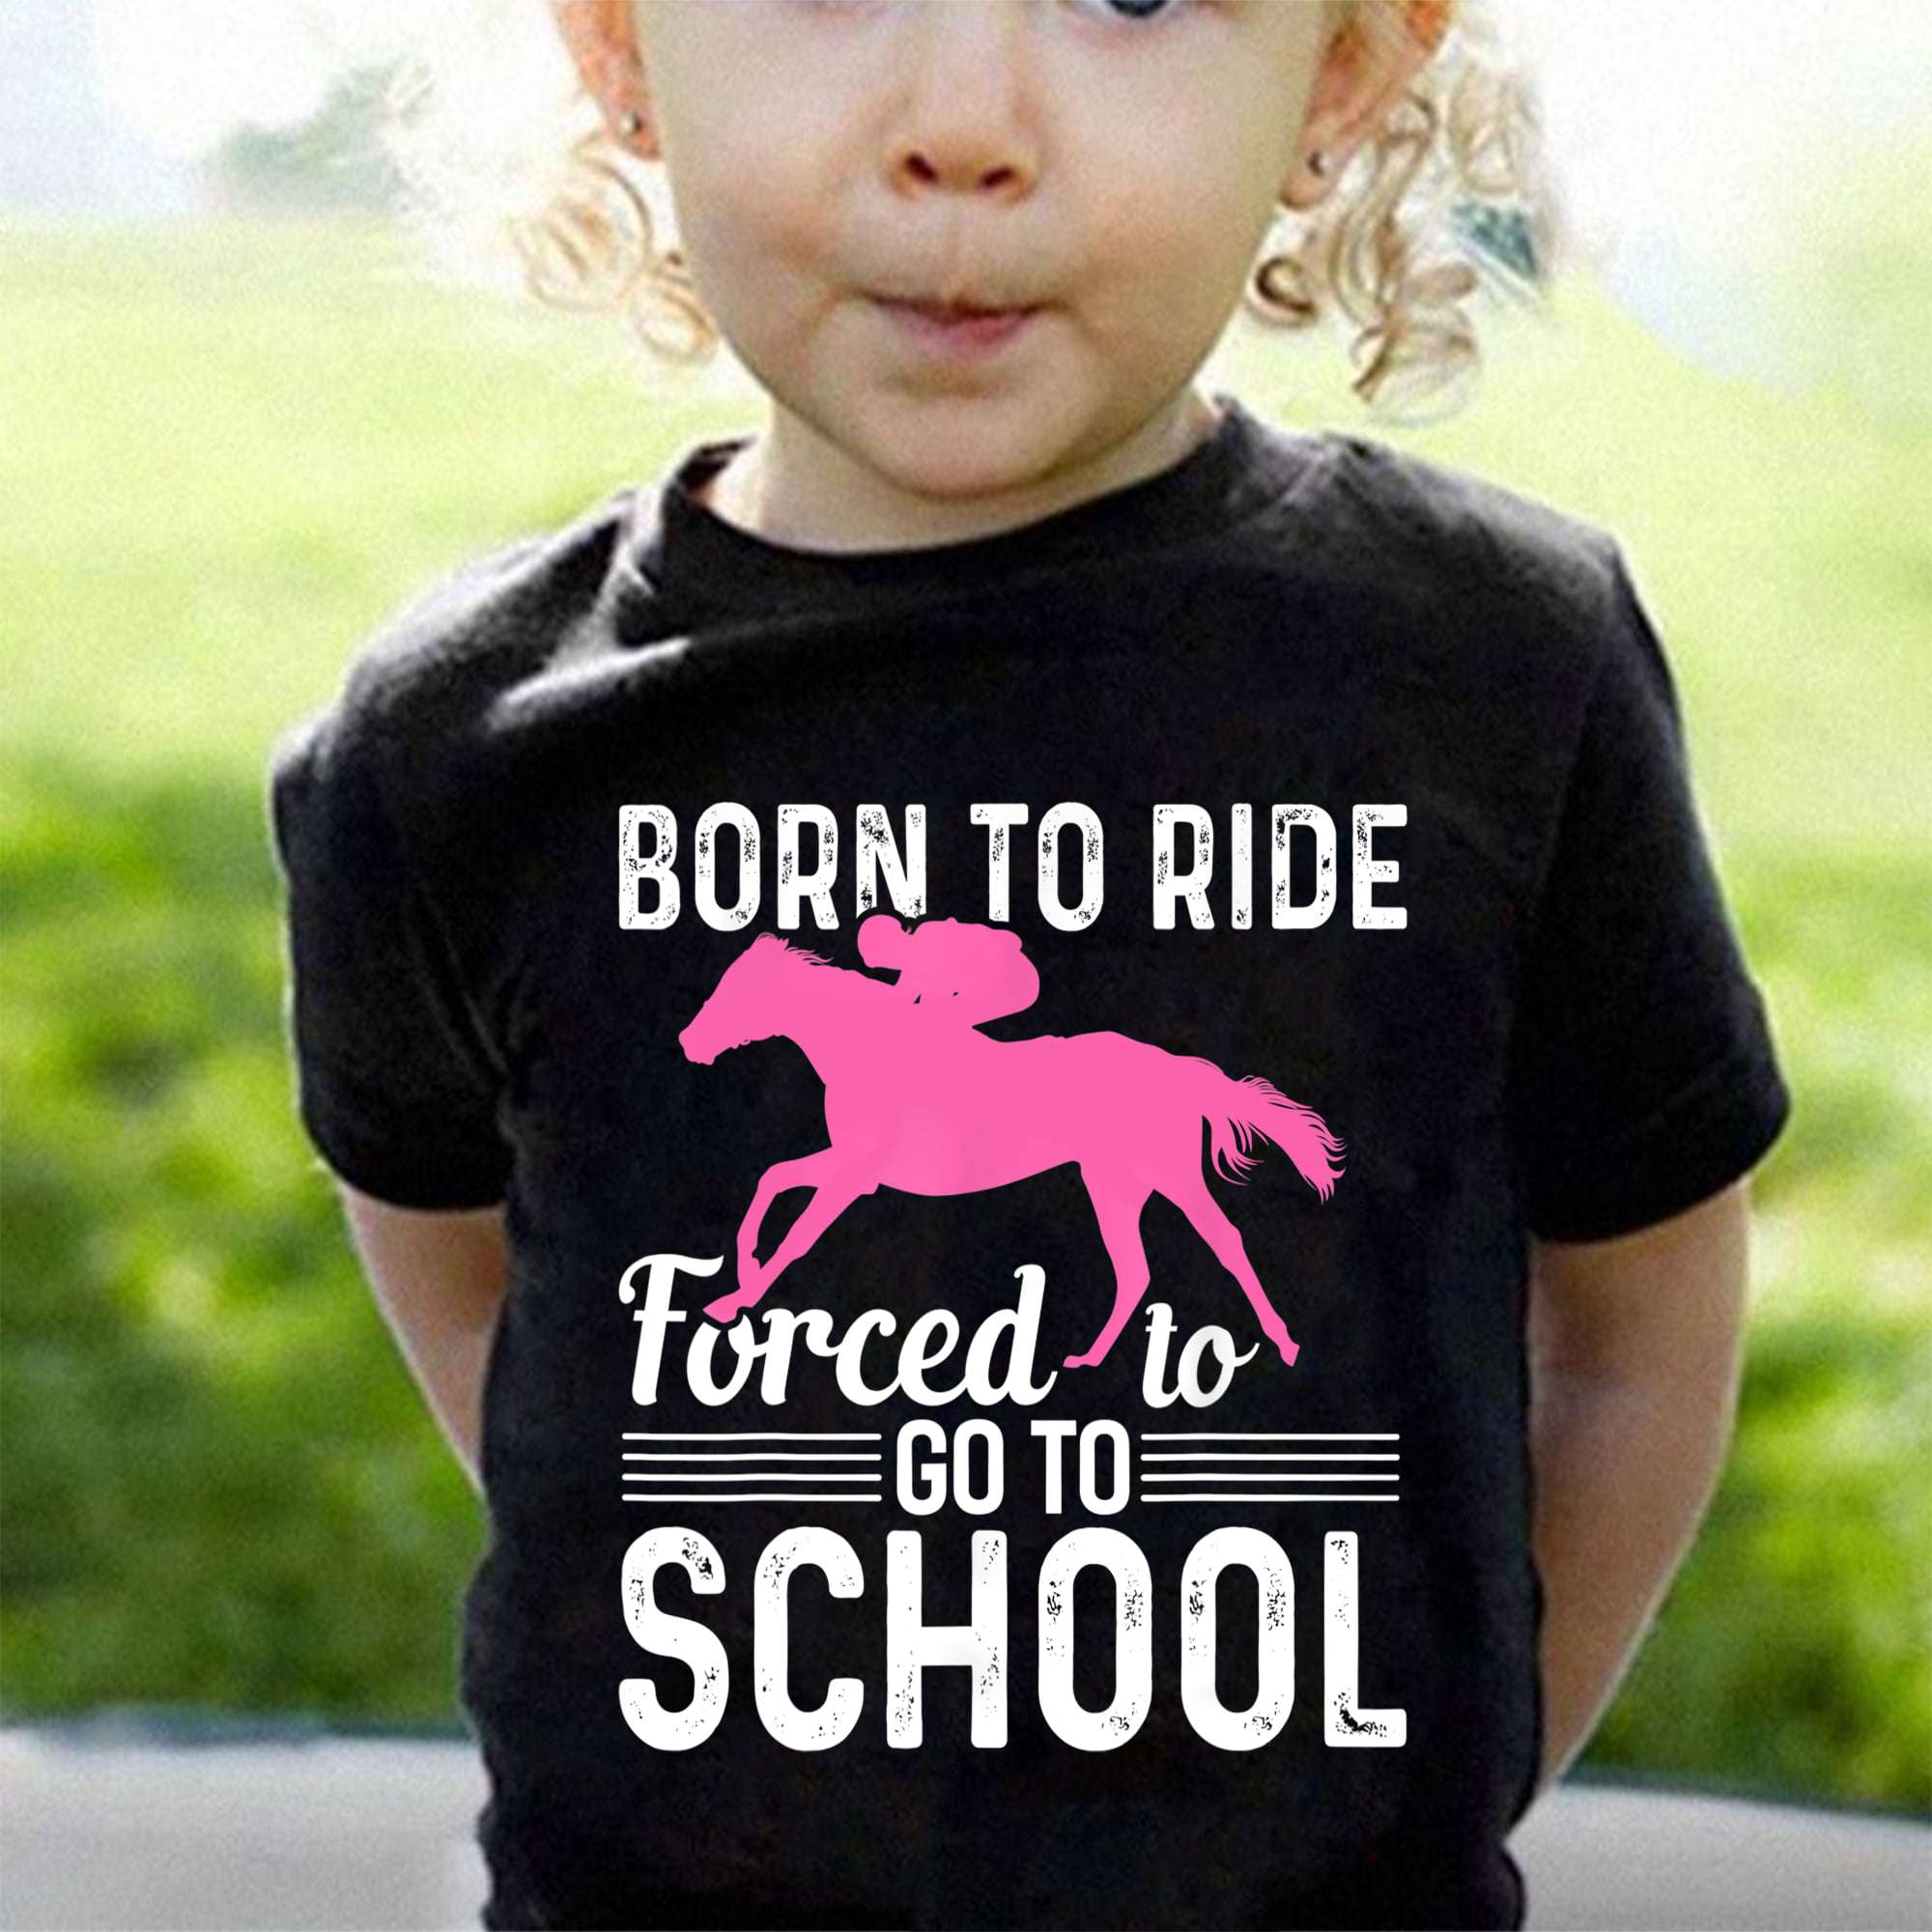 Love Horse - Born to ride forced to go to school